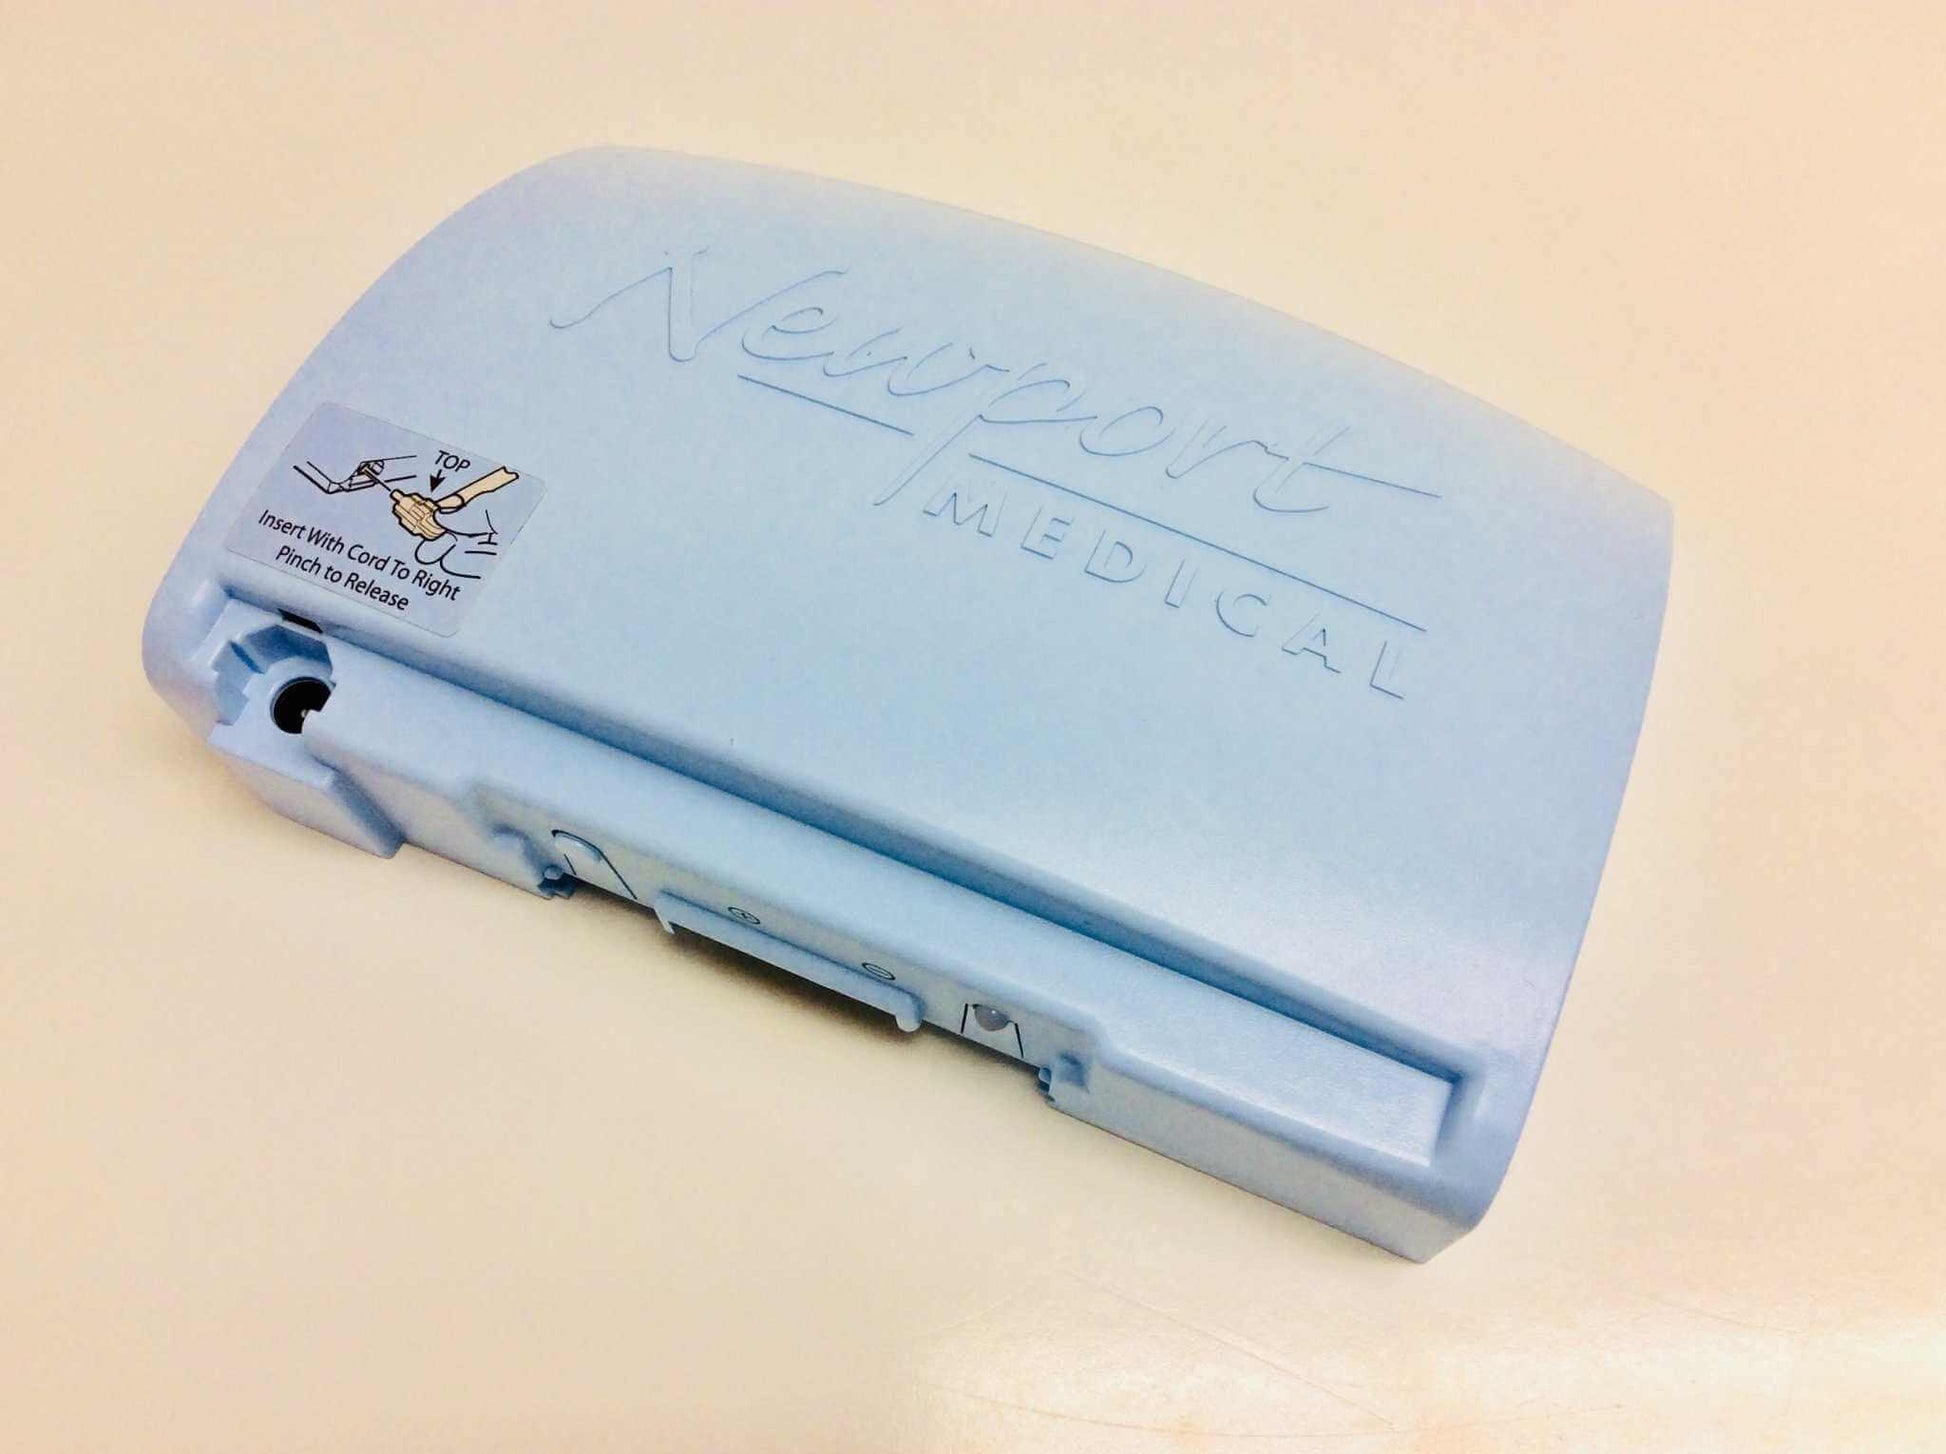 USED Newport Medical HT70 HT70 Plus External Battery BAT3271A Warranty FREE Shipping - MBR Medicals